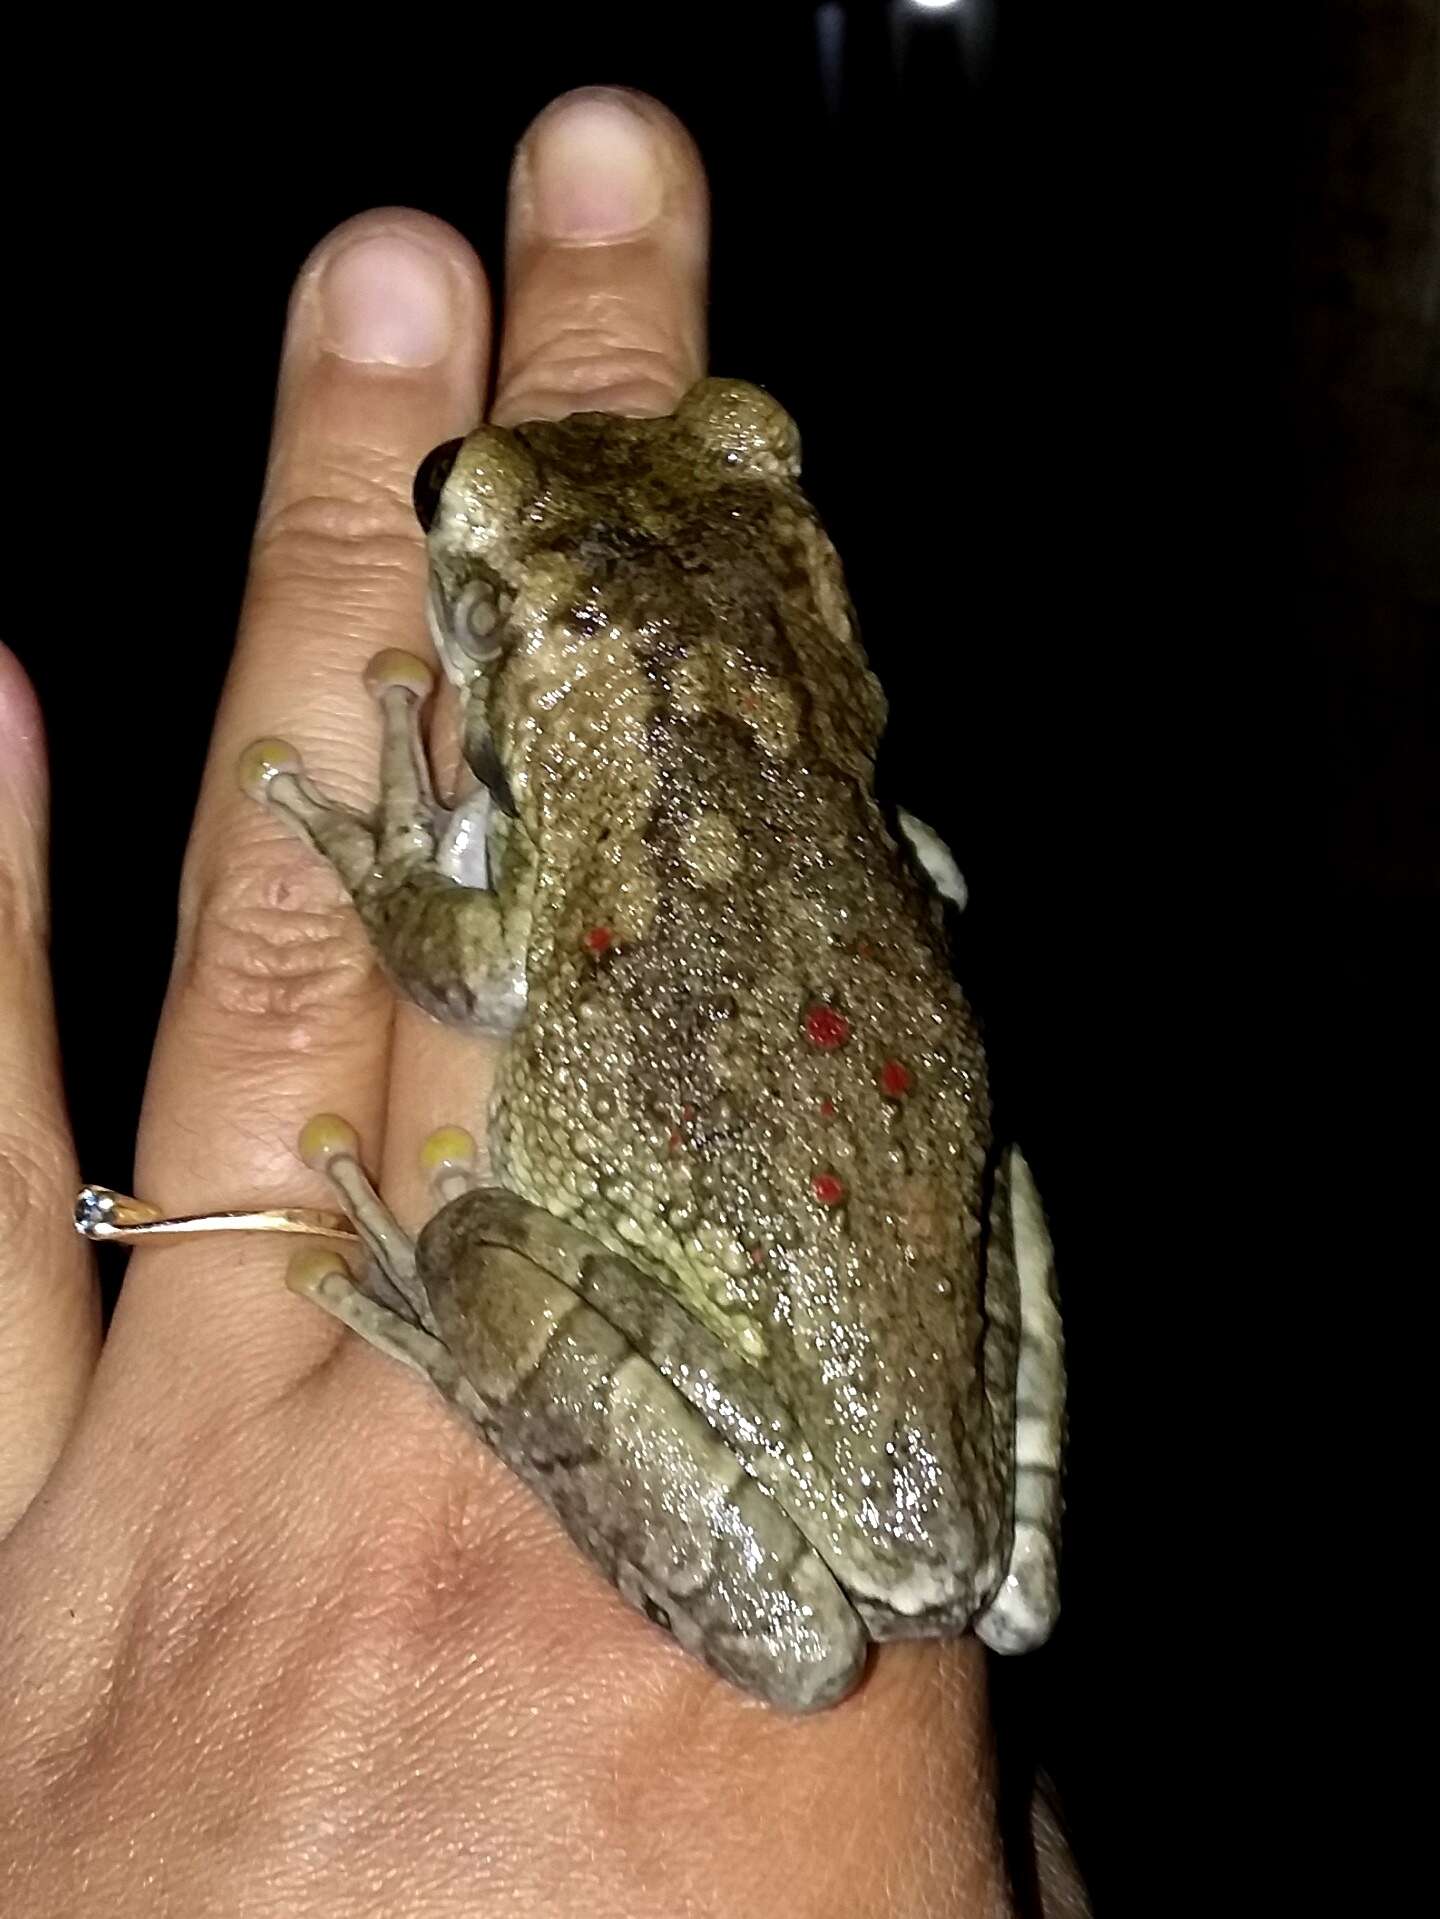 Image of Black-spotted Casque-headed Treefrog